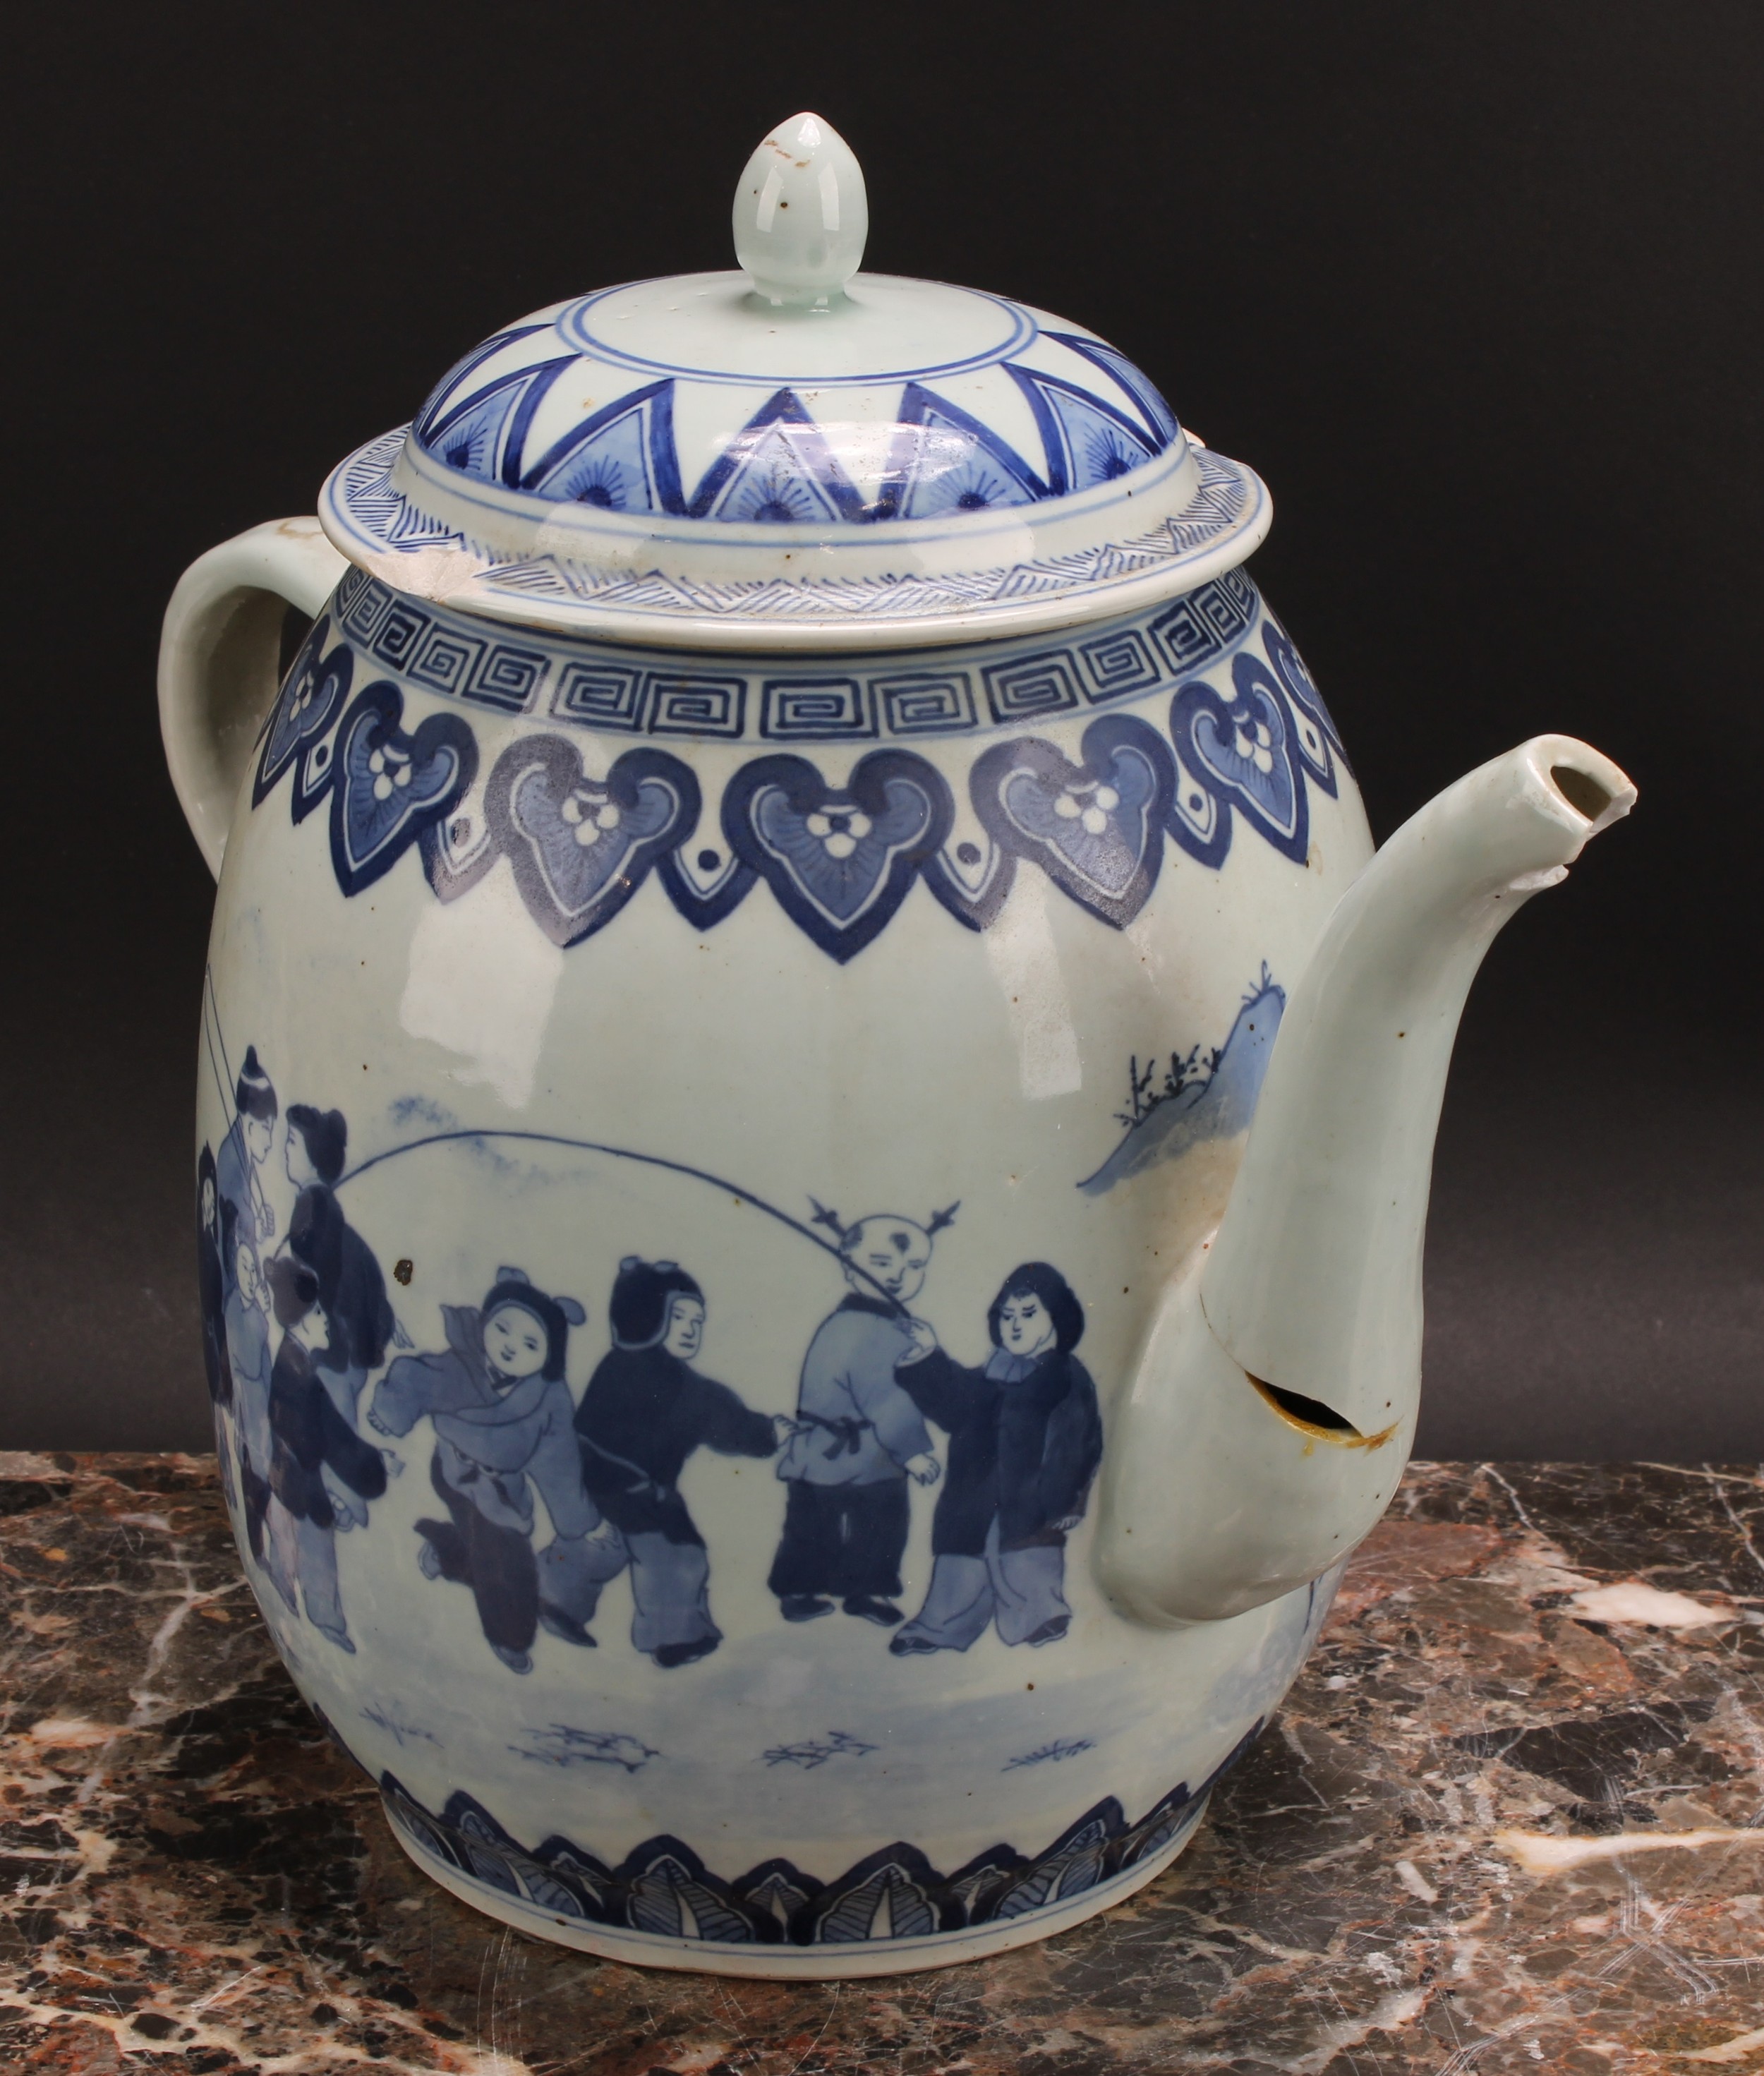 A large 19th century Chinese wine pot and cover, decorated in underglaze blue with figures from - Image 2 of 6